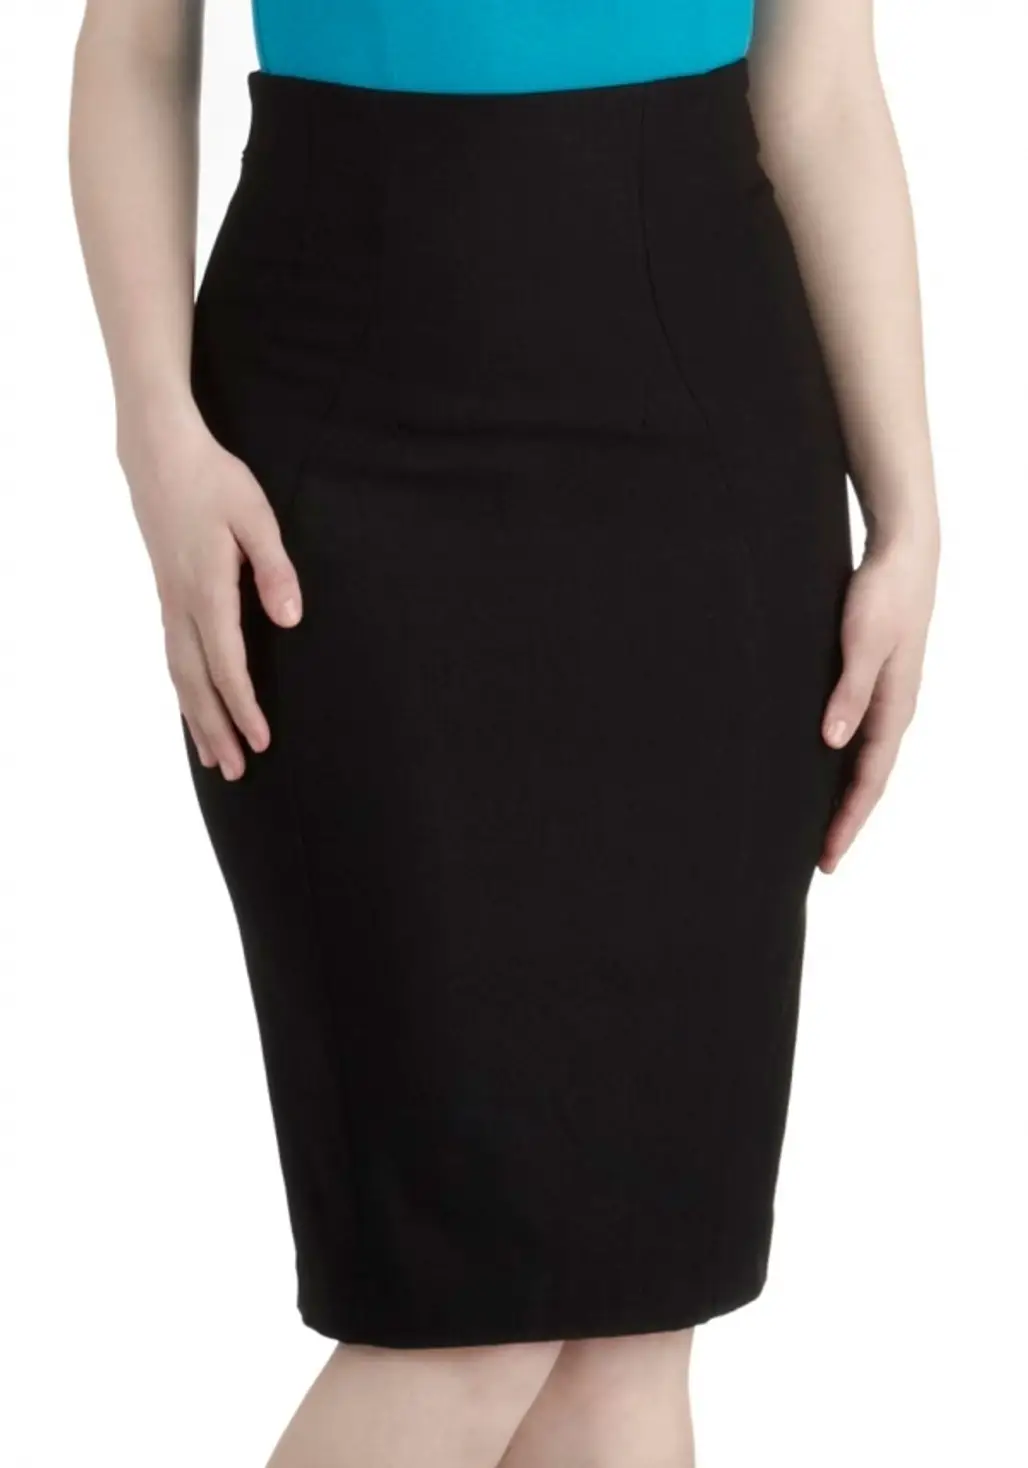 The Curve Hugging Pencil Skirt